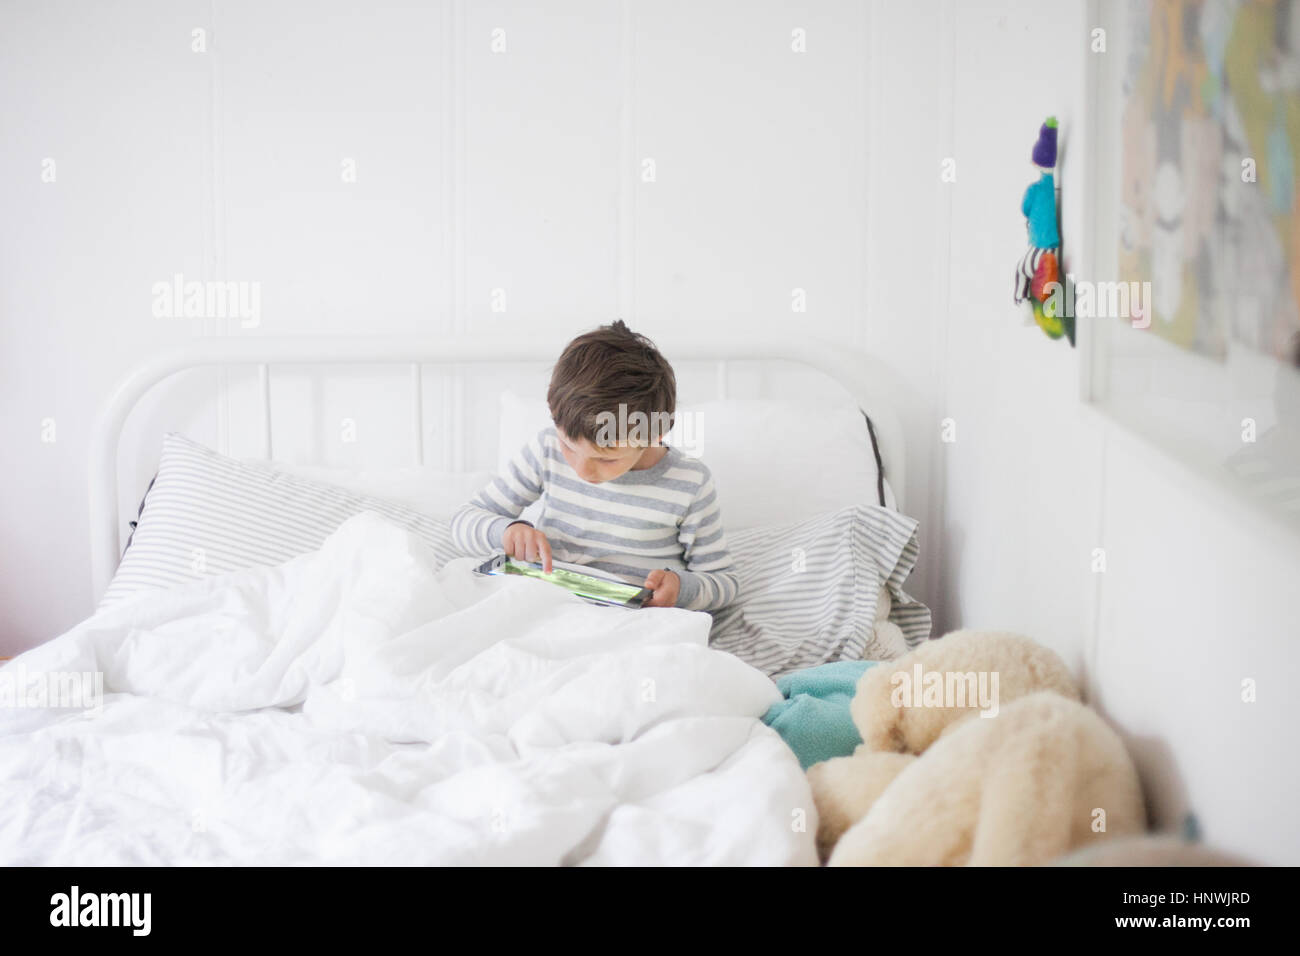 Boy sitting up in bed playing video game on digital tablet Stock Photo